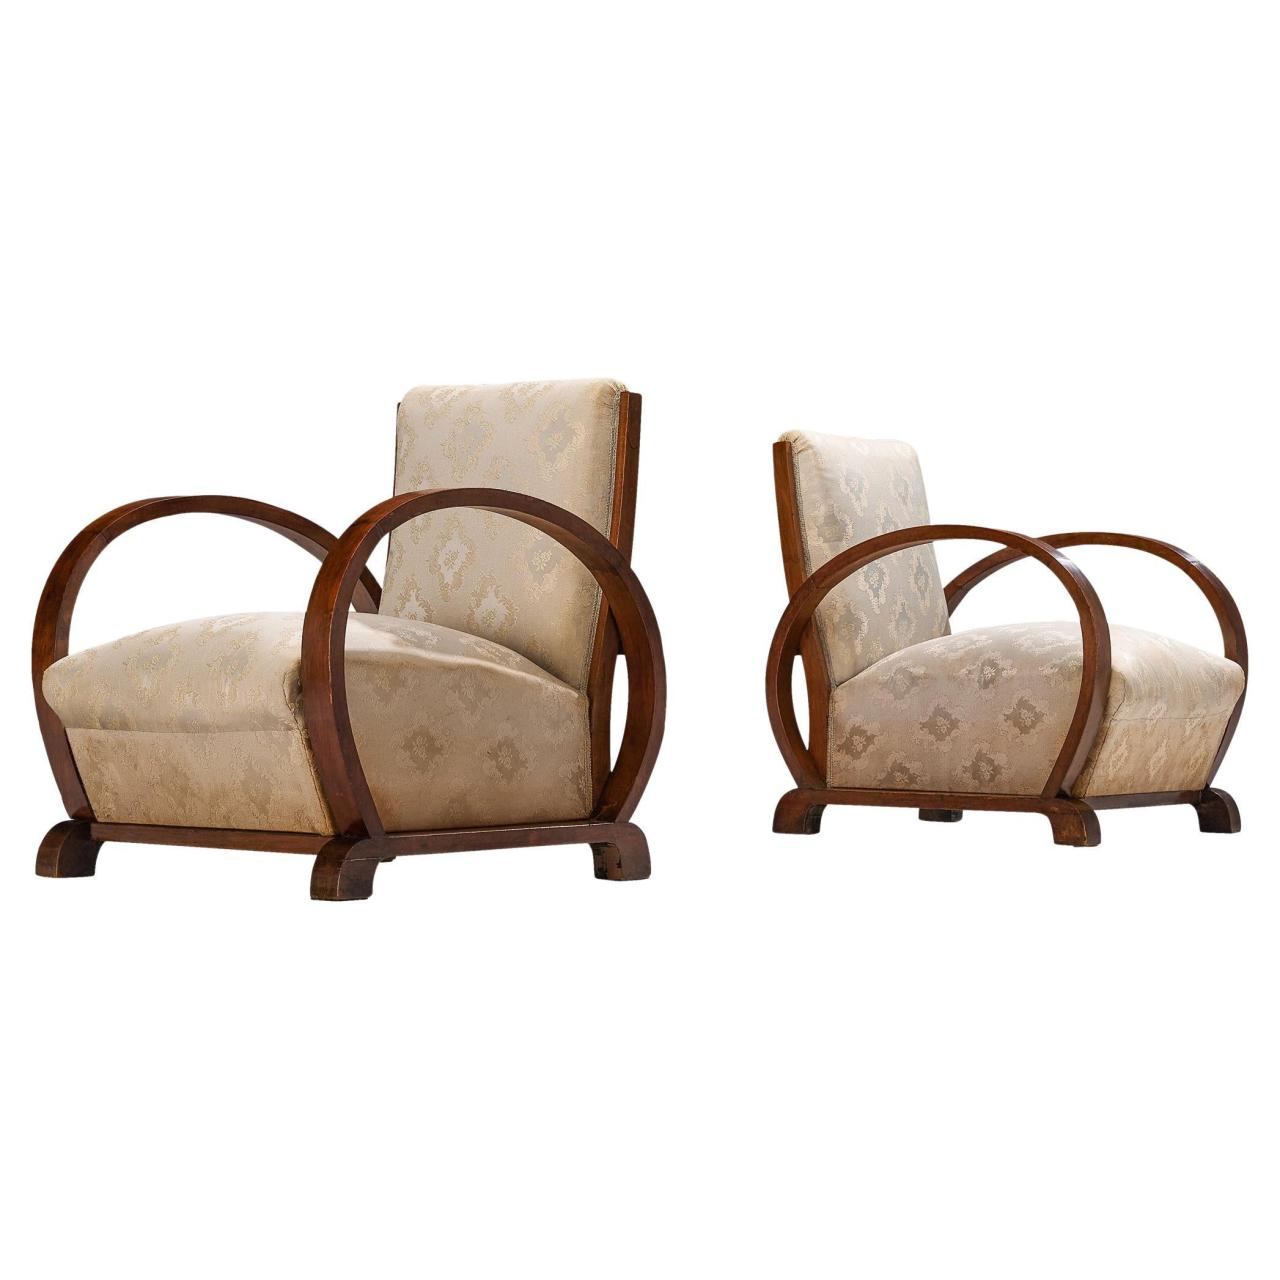 Art Deco Pair Of Lounge Chairs In Walnut And Floral Upholstery For Sale At  1Stdibs | Art Deco Lounge Chairs, 1930 Chairs, Art Deco Upholstered Chair